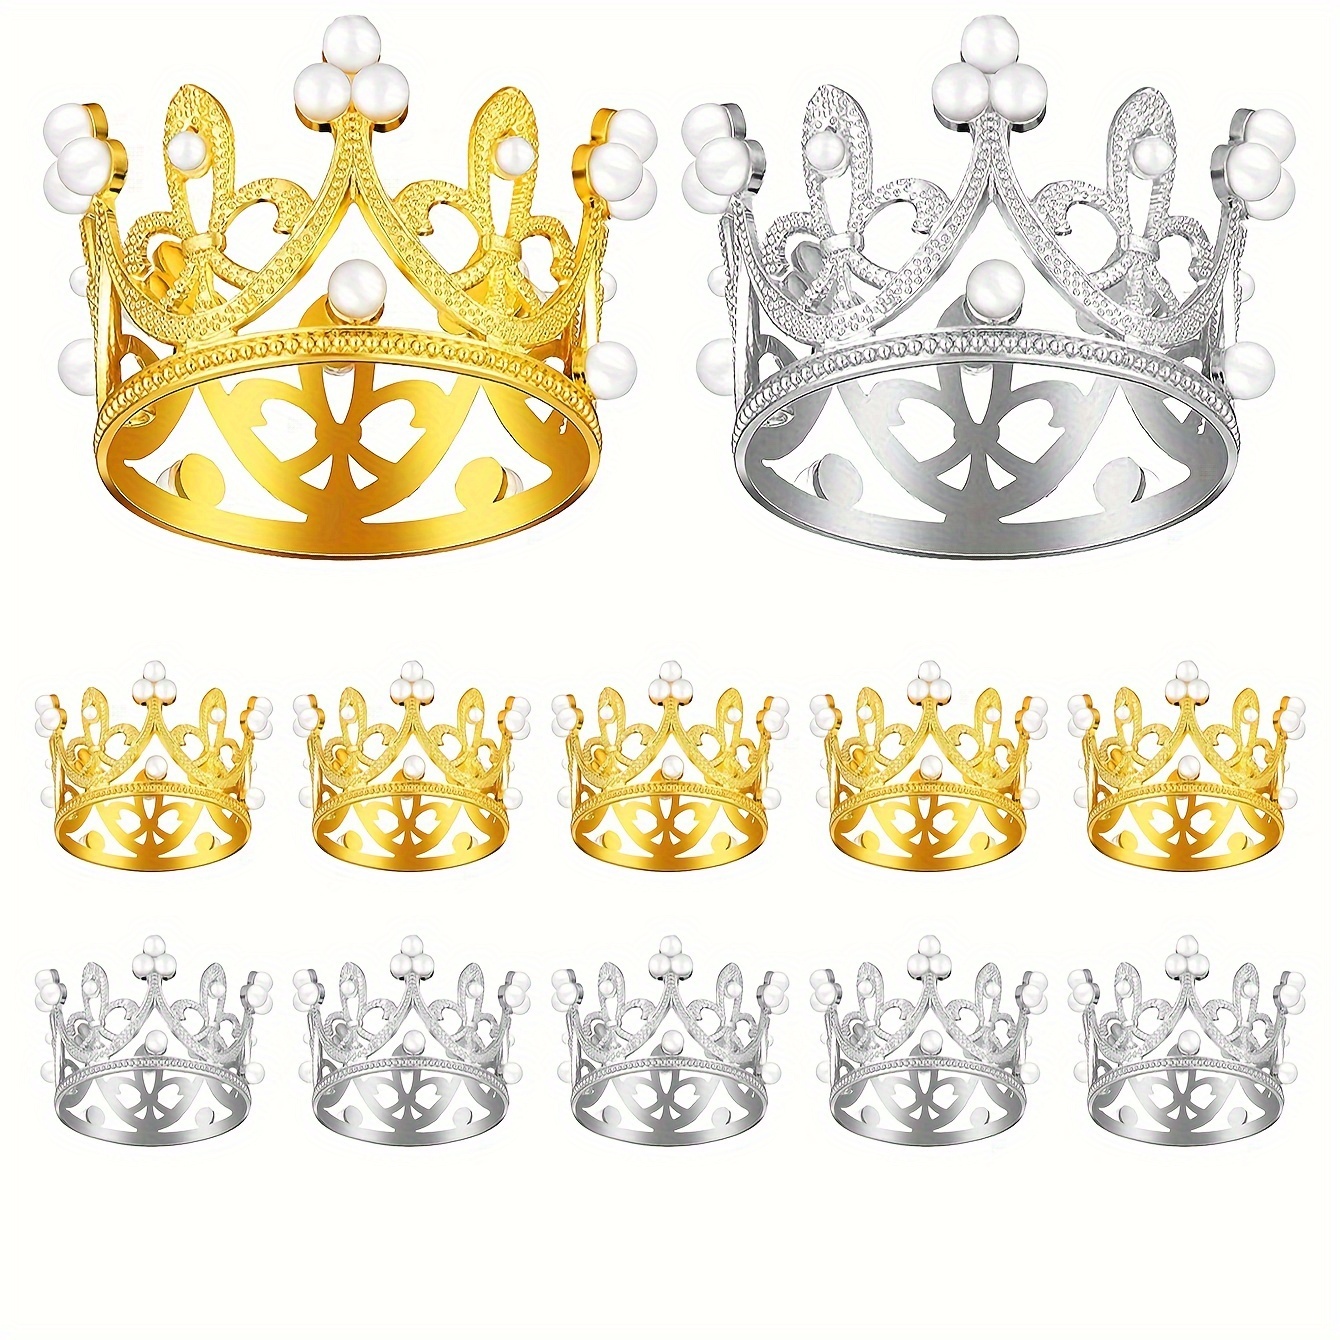 

12-pack Miniature Crown Cake Toppers, Zinc Alloy Queen Princess Tiara Party Decorations For Wedding, Royal Themed Showers, And Birthday Parties - Gold And Silver Finish, Party Style Accessories